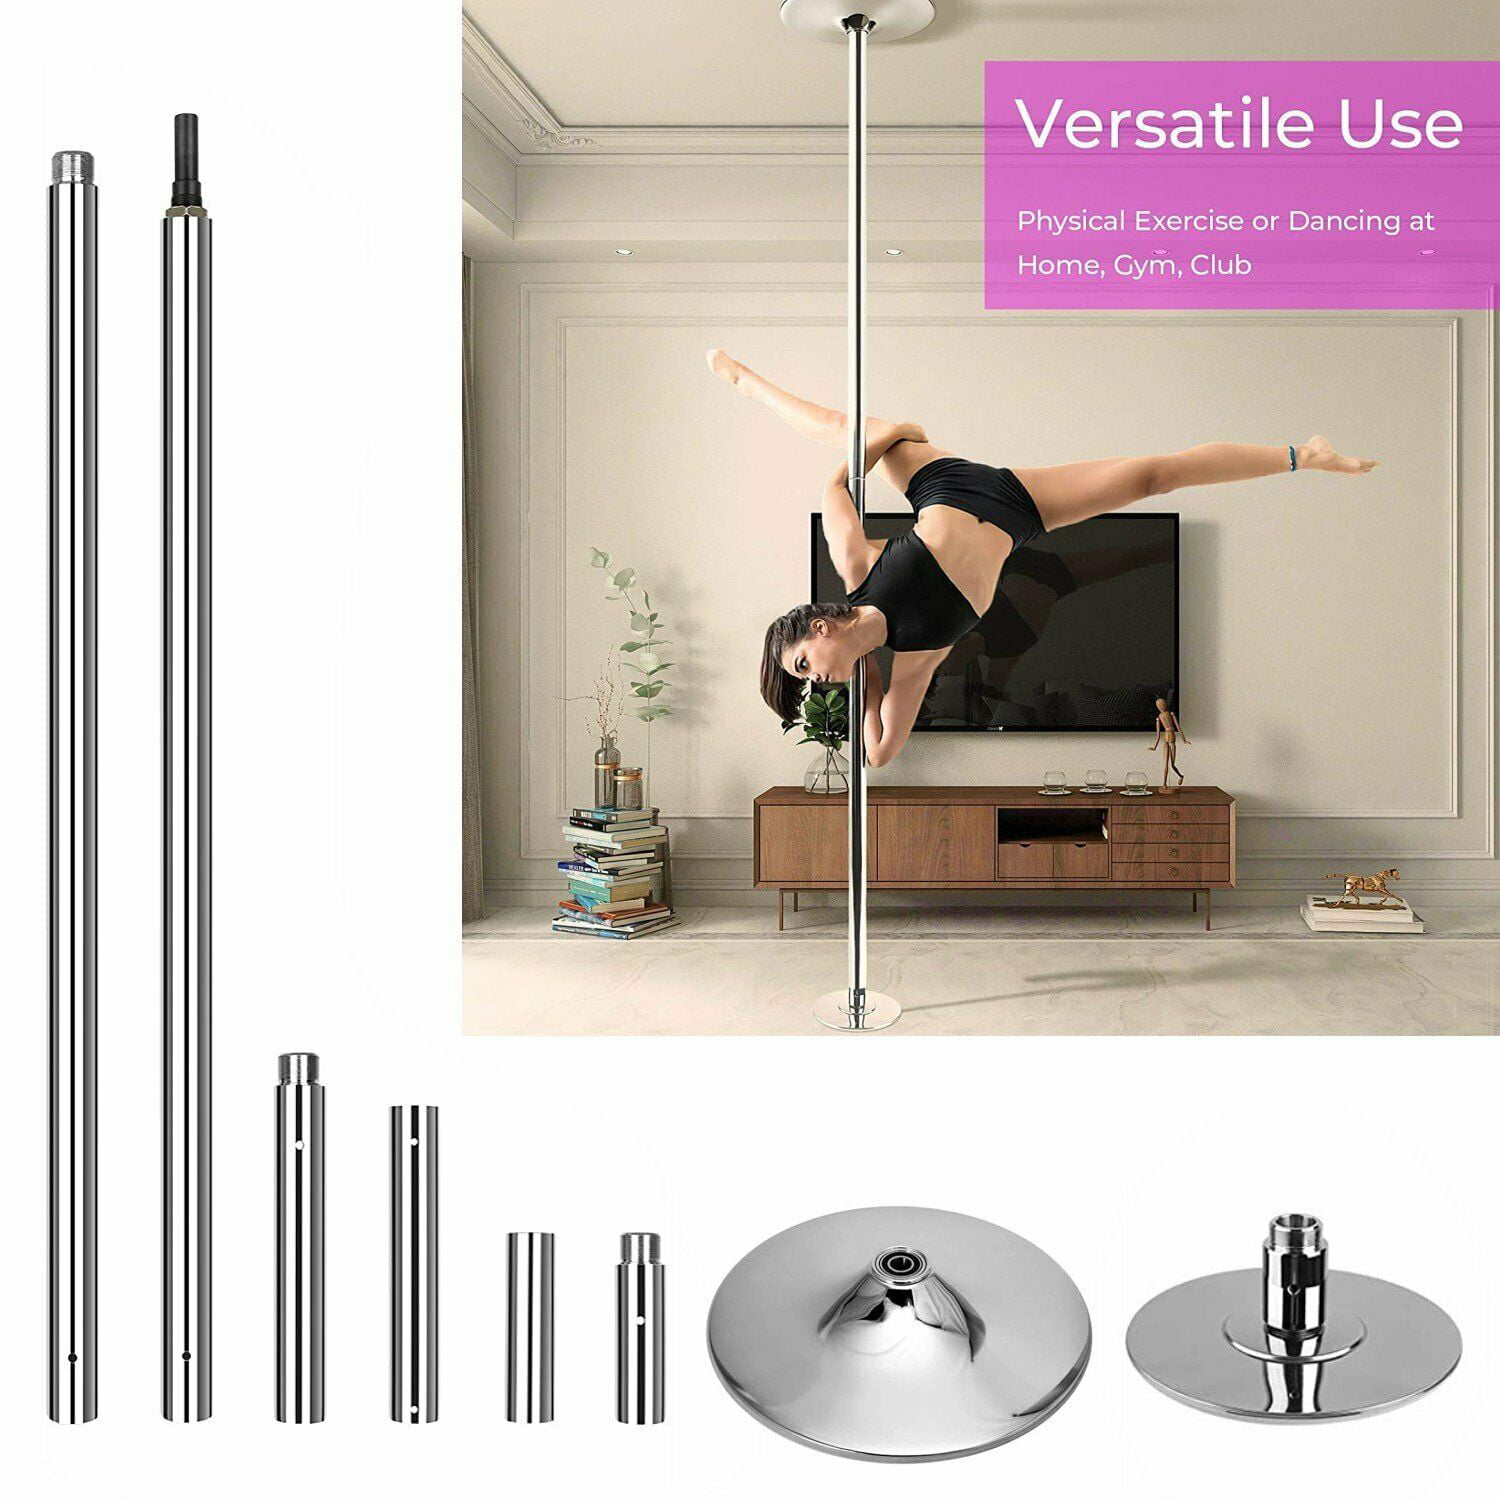 45mm Dance Pole Professional Stripper Pole Spinning Static Dancing Pole Portable 